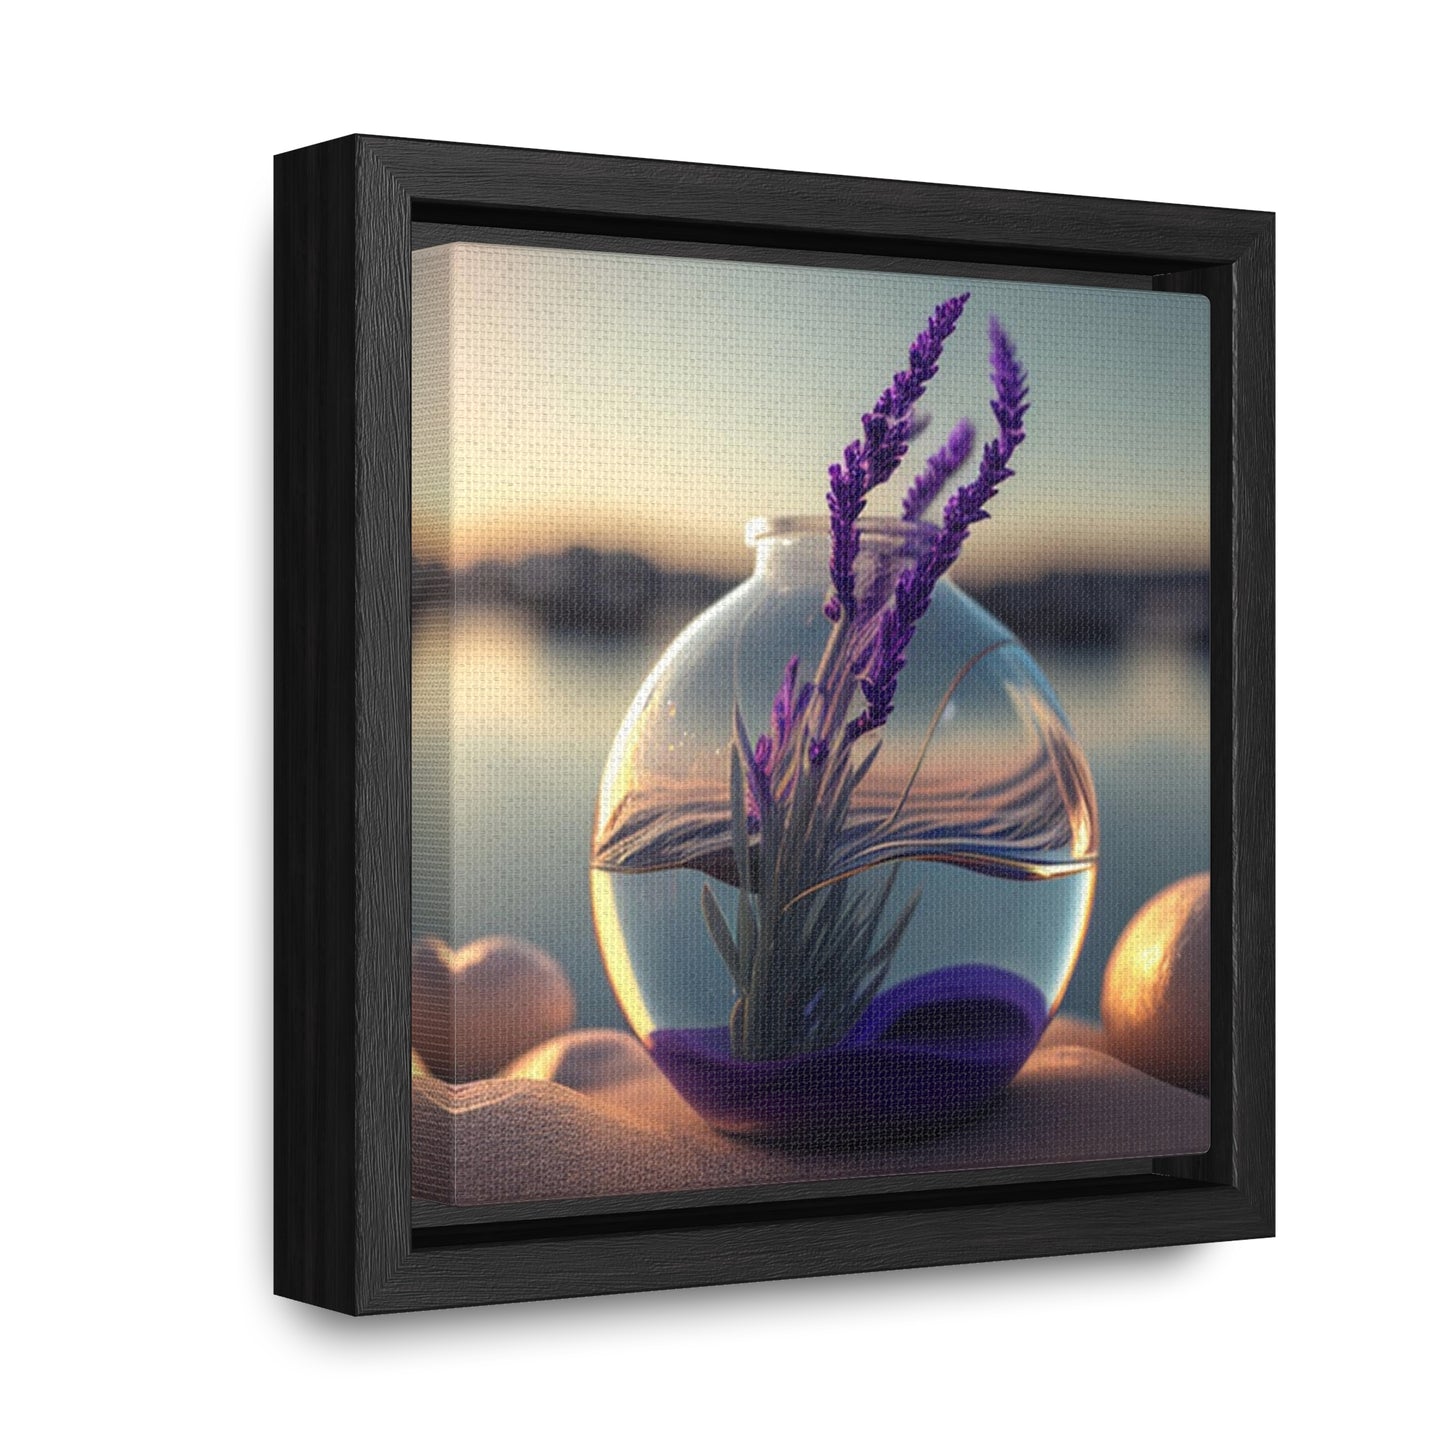 Gallery Canvas Wraps, Square Frame Lavender in a vase 3